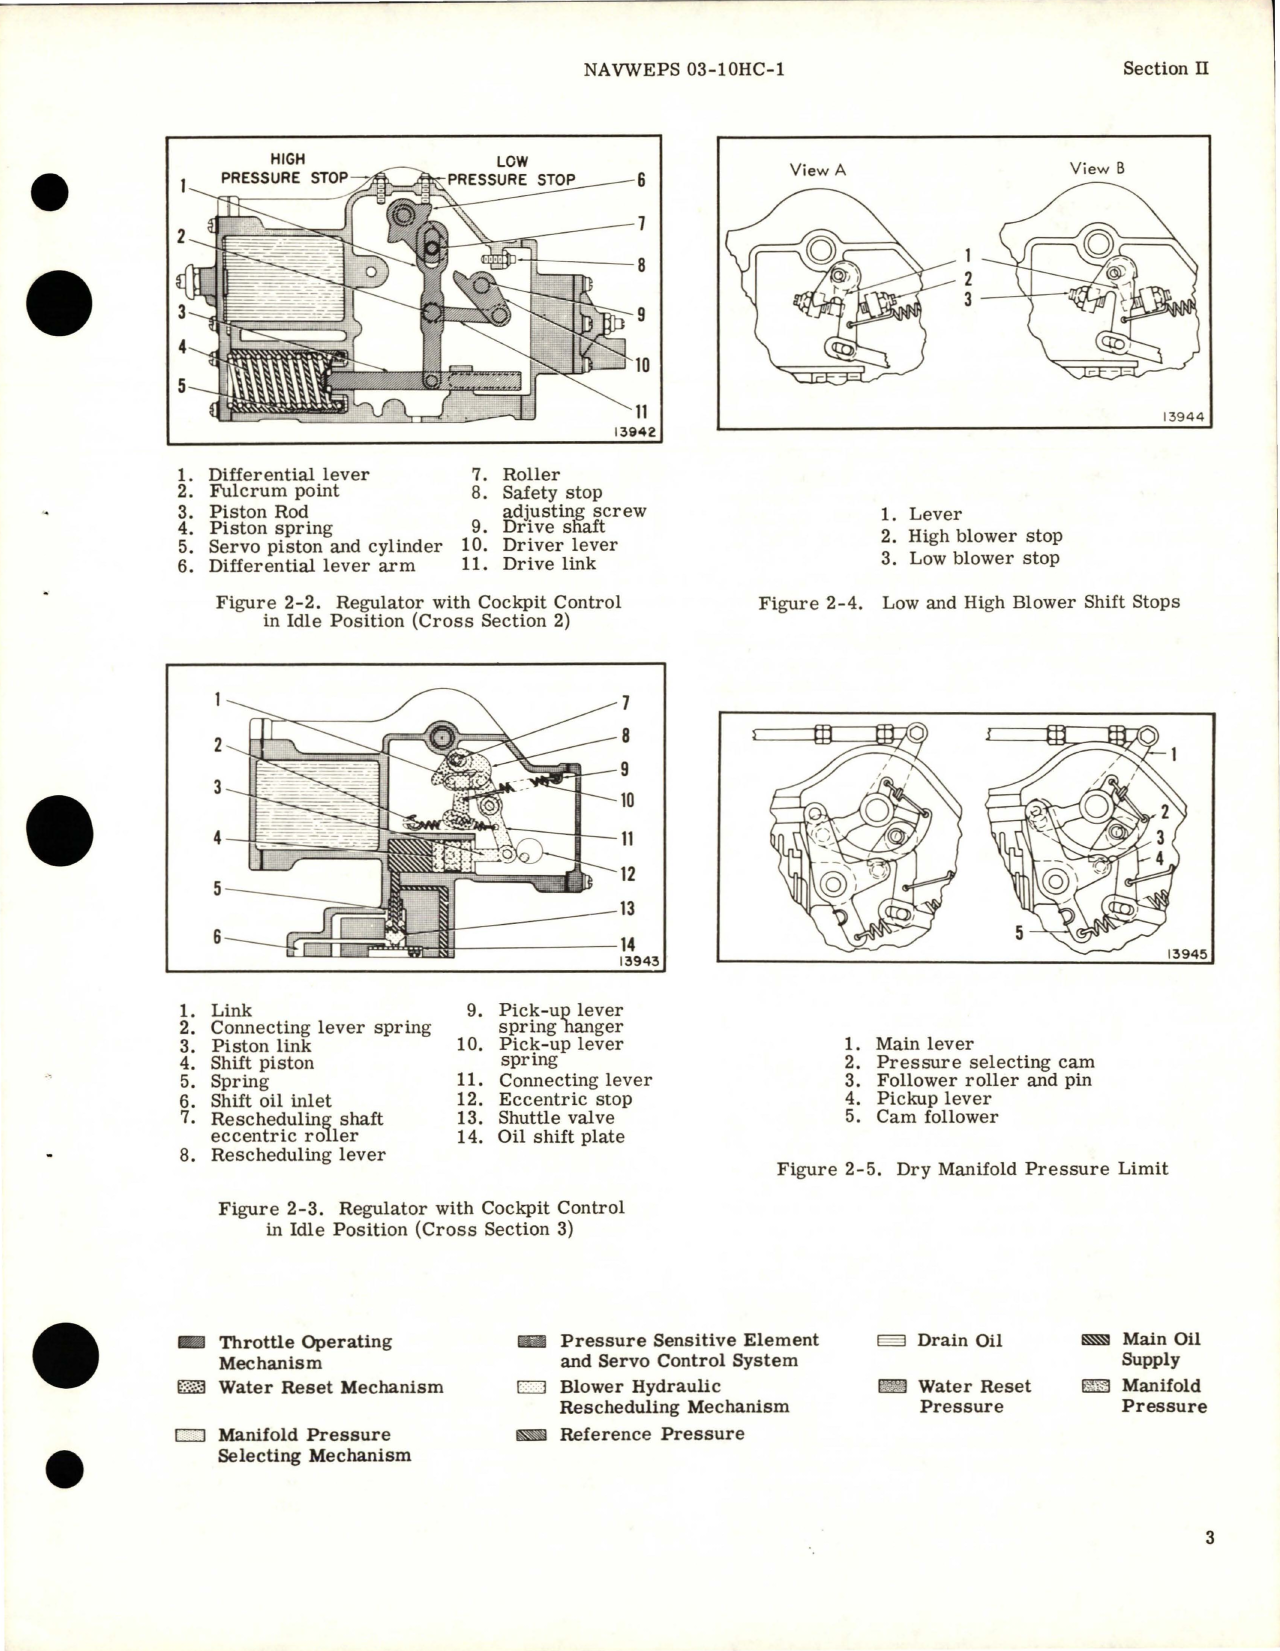 Sample page 9 from AirCorps Library document: Operation, Service, Overhaul Instructions w Parts Catalog for Manifold Pressure Regulator Assembly